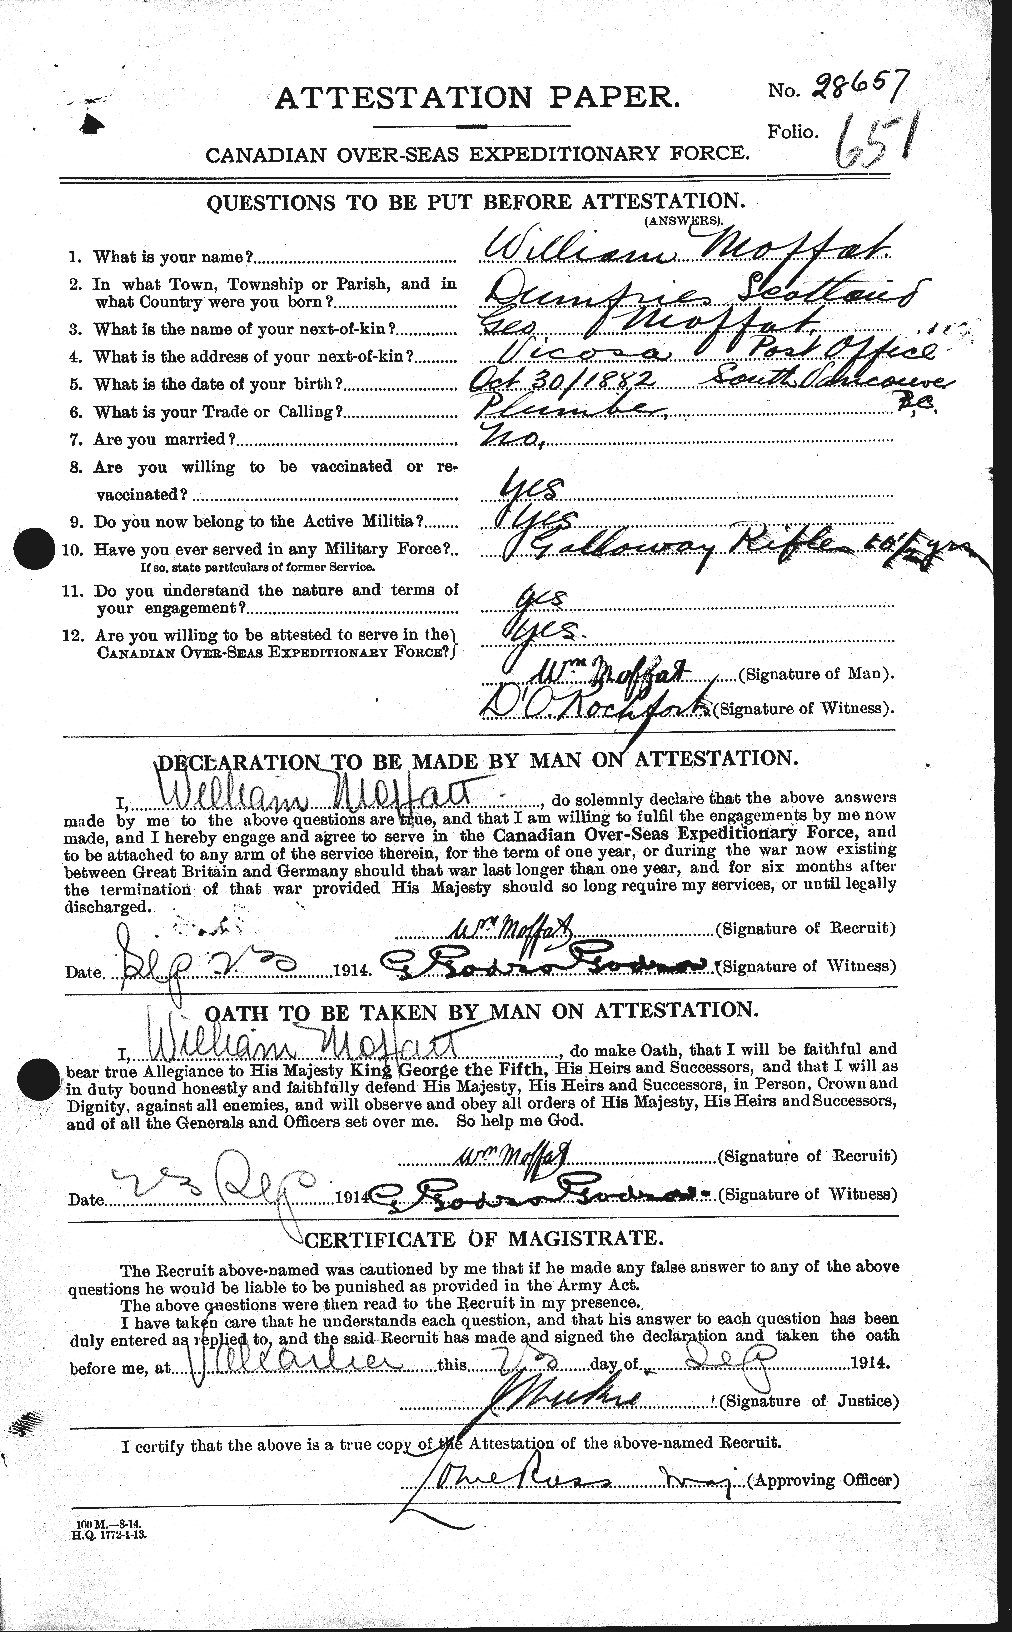 Personnel Records of the First World War - CEF 499089a